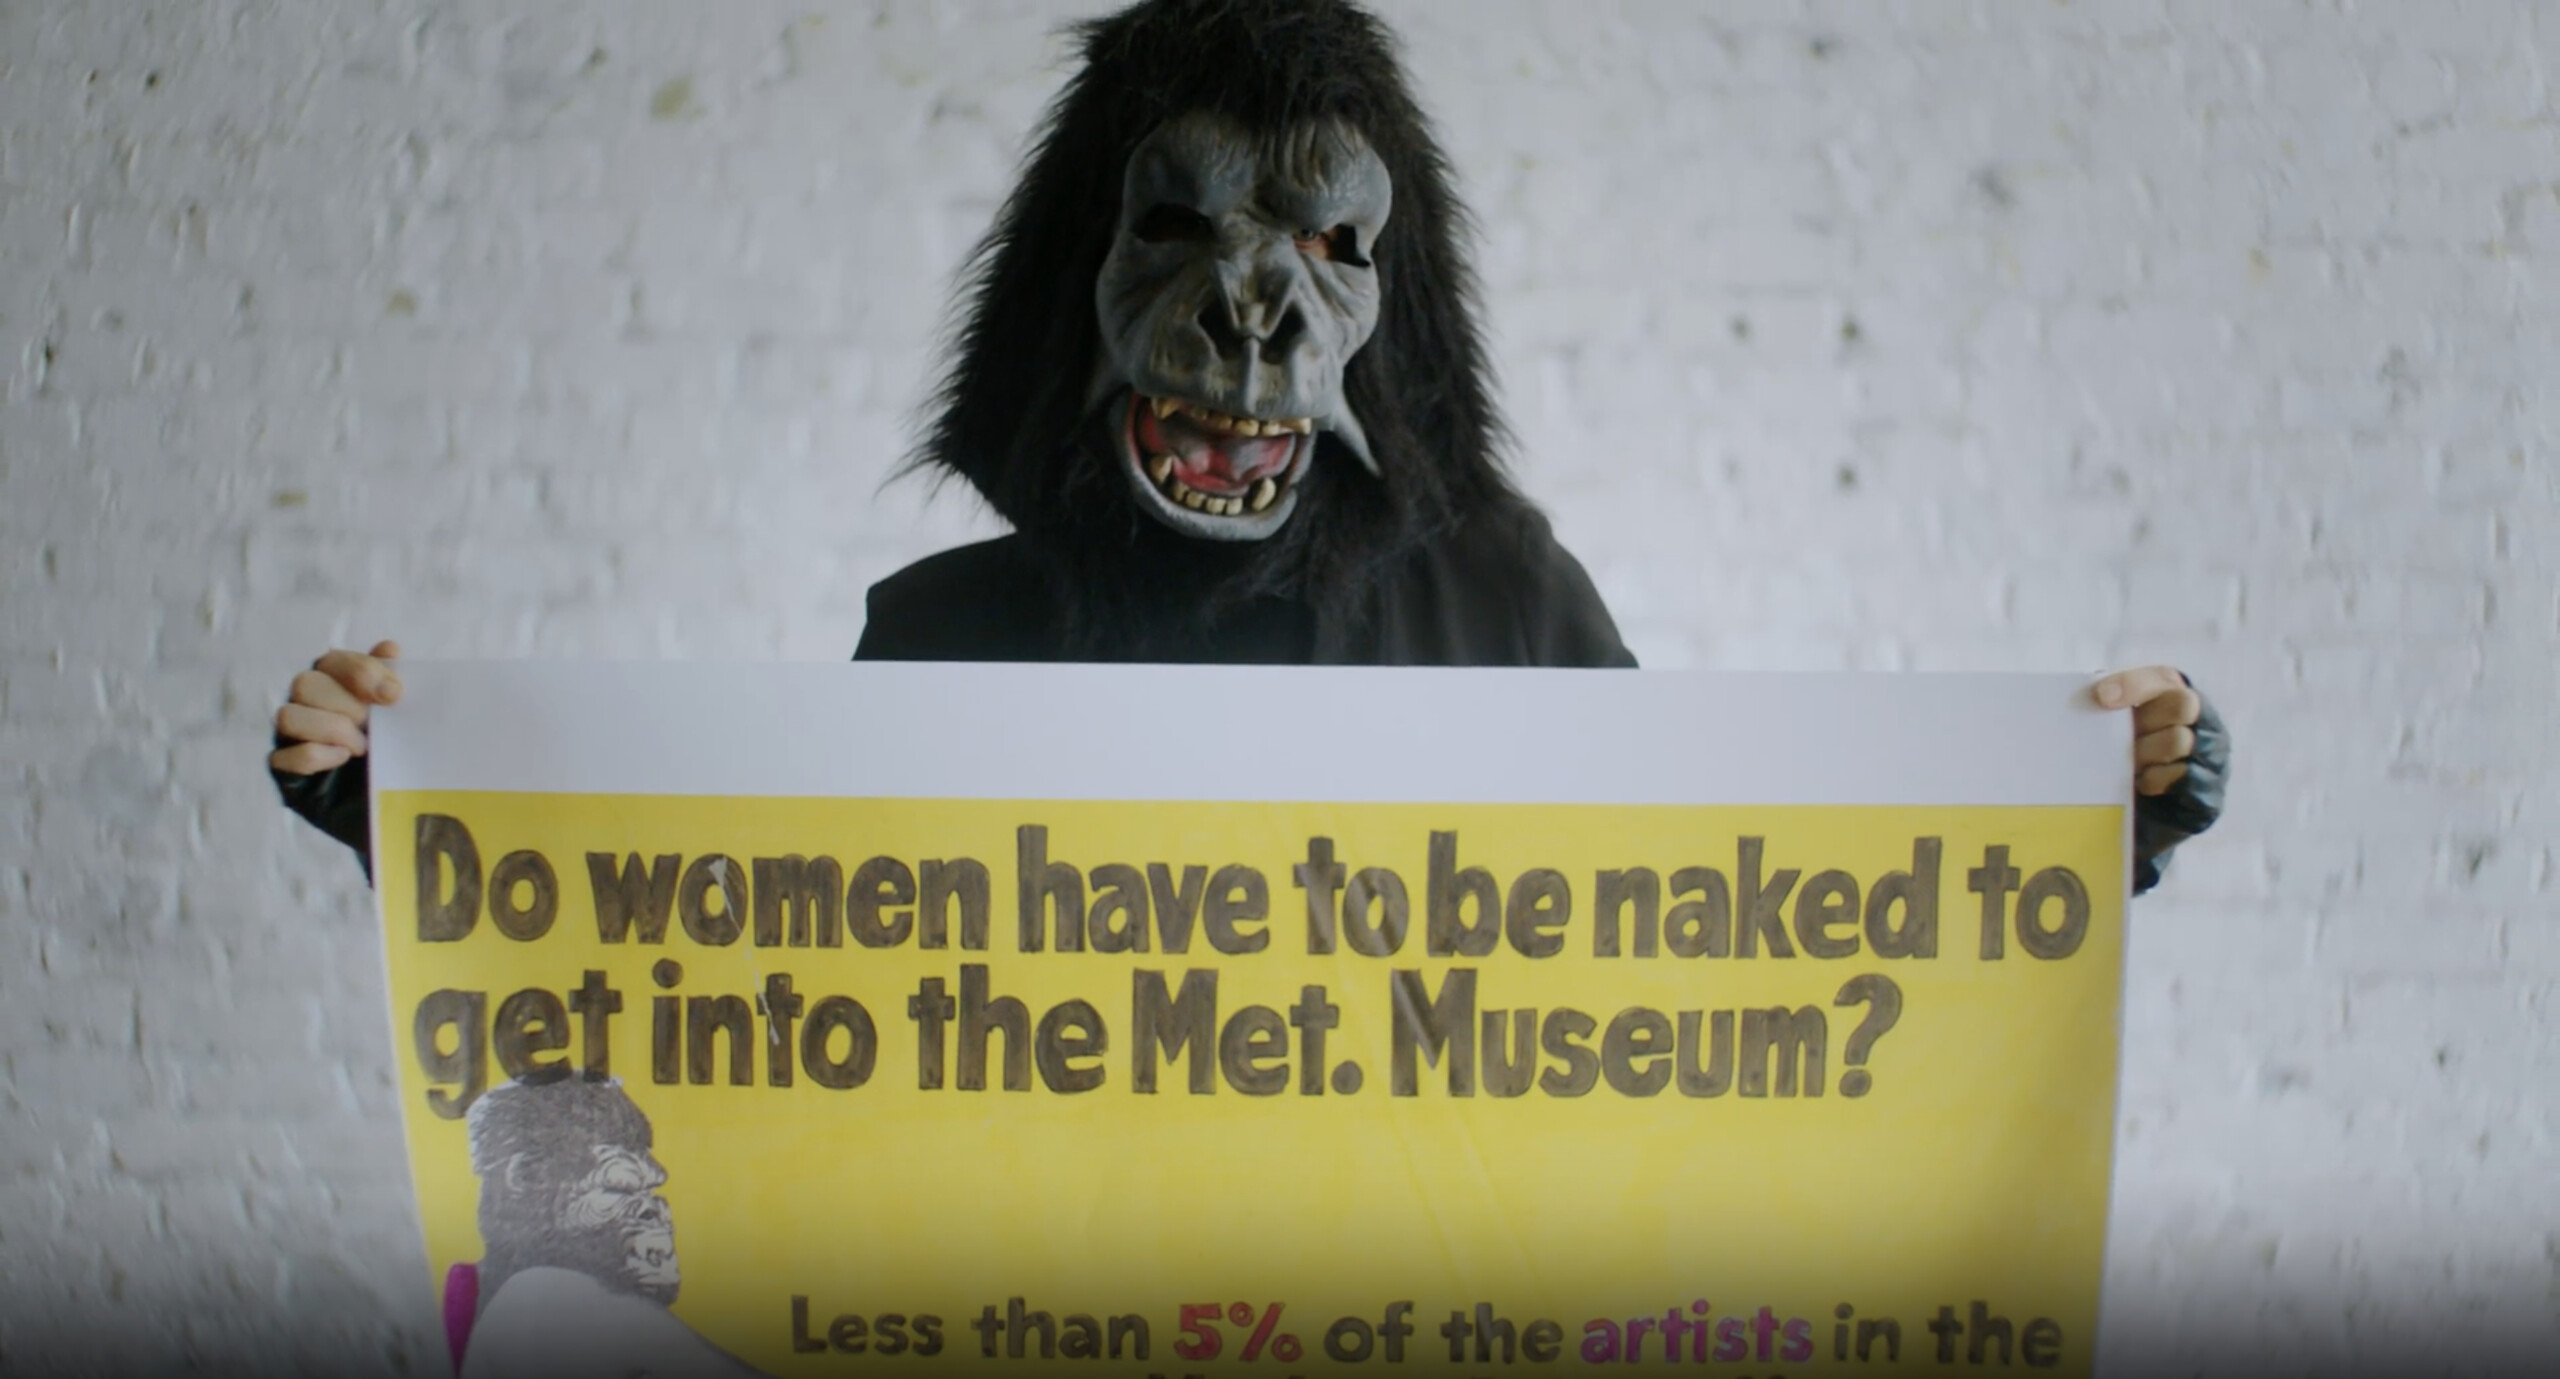 A person wearing a gorilla mask an a black long sleeve shirt holds a large poster that reads "Do women have to be naked to get into the Met. Museum?" standing against a whitewashed brick wall.